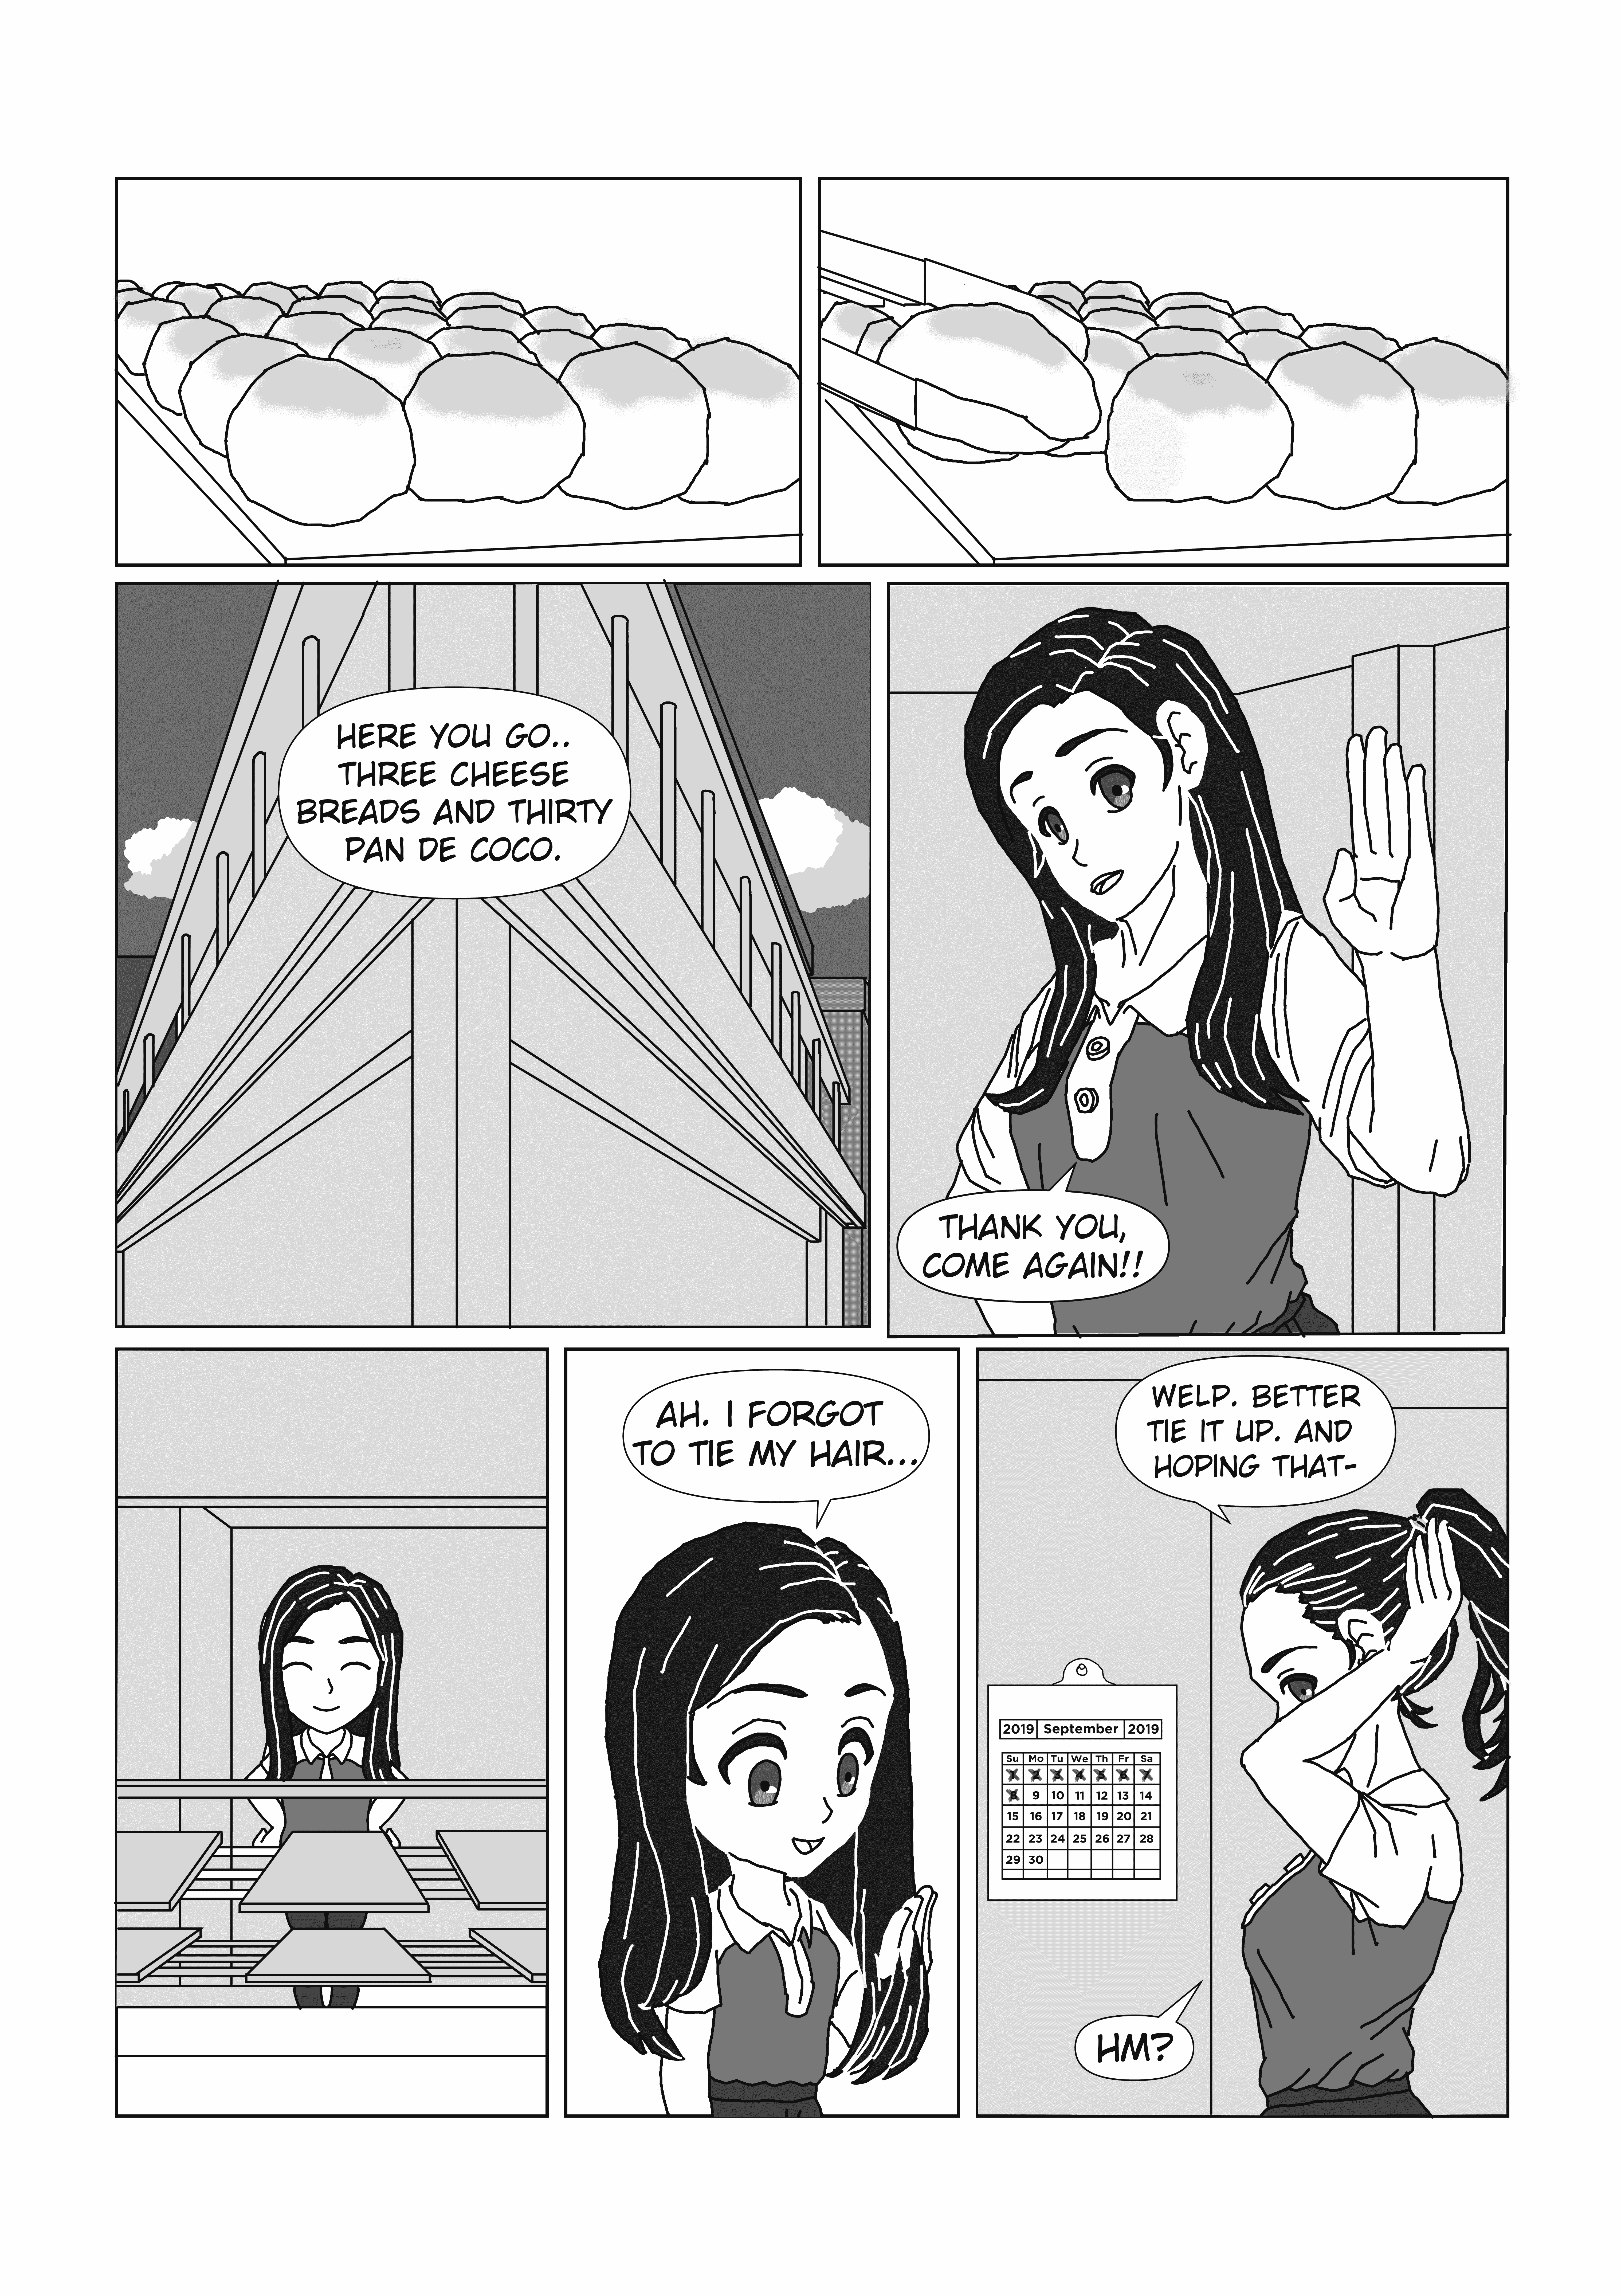 Daily Lives In Other World - Breadwinner Page 1